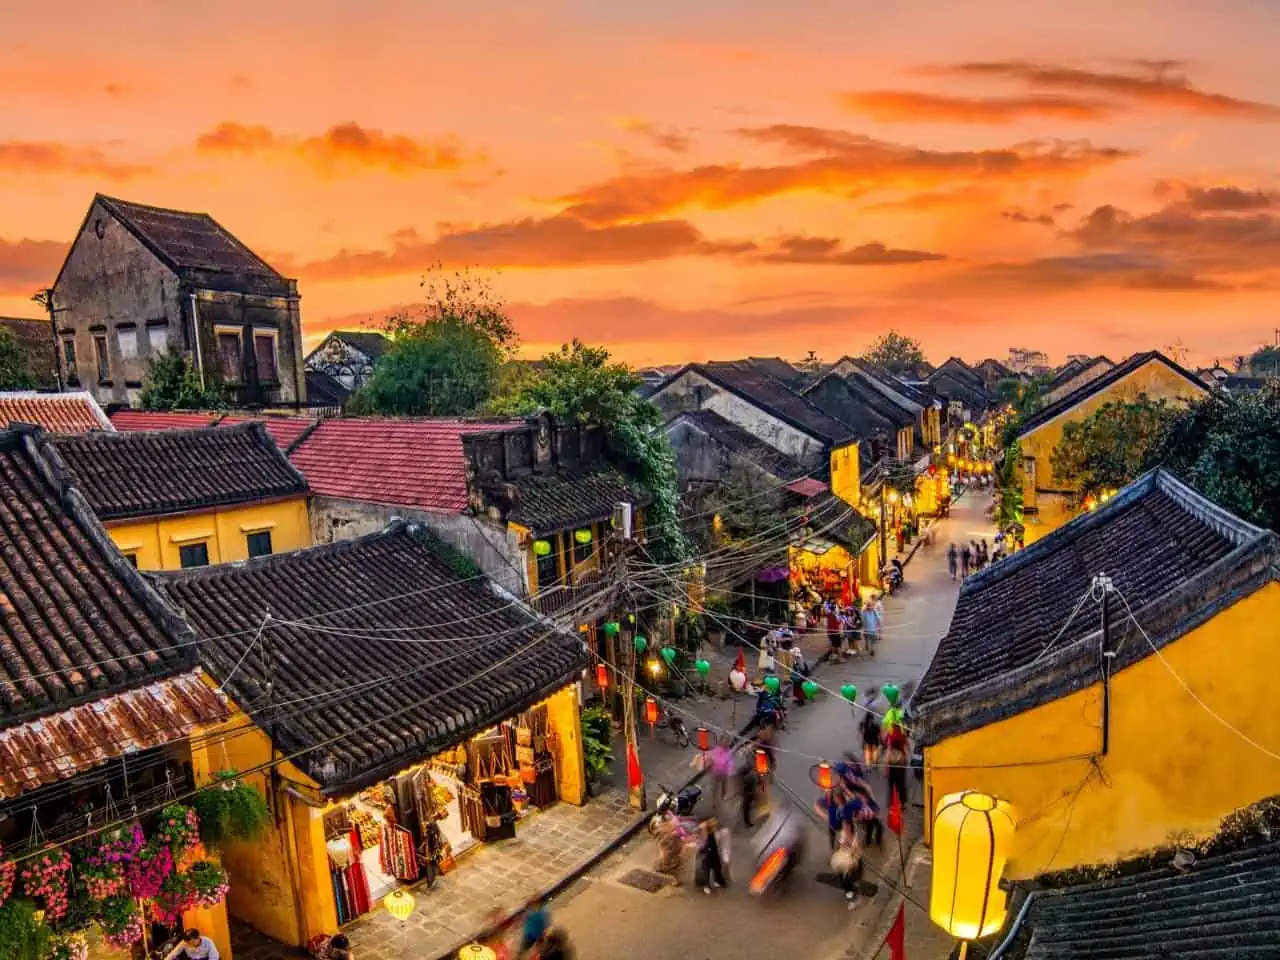 Top 10 Things To Do In Hoi An, Vietnam